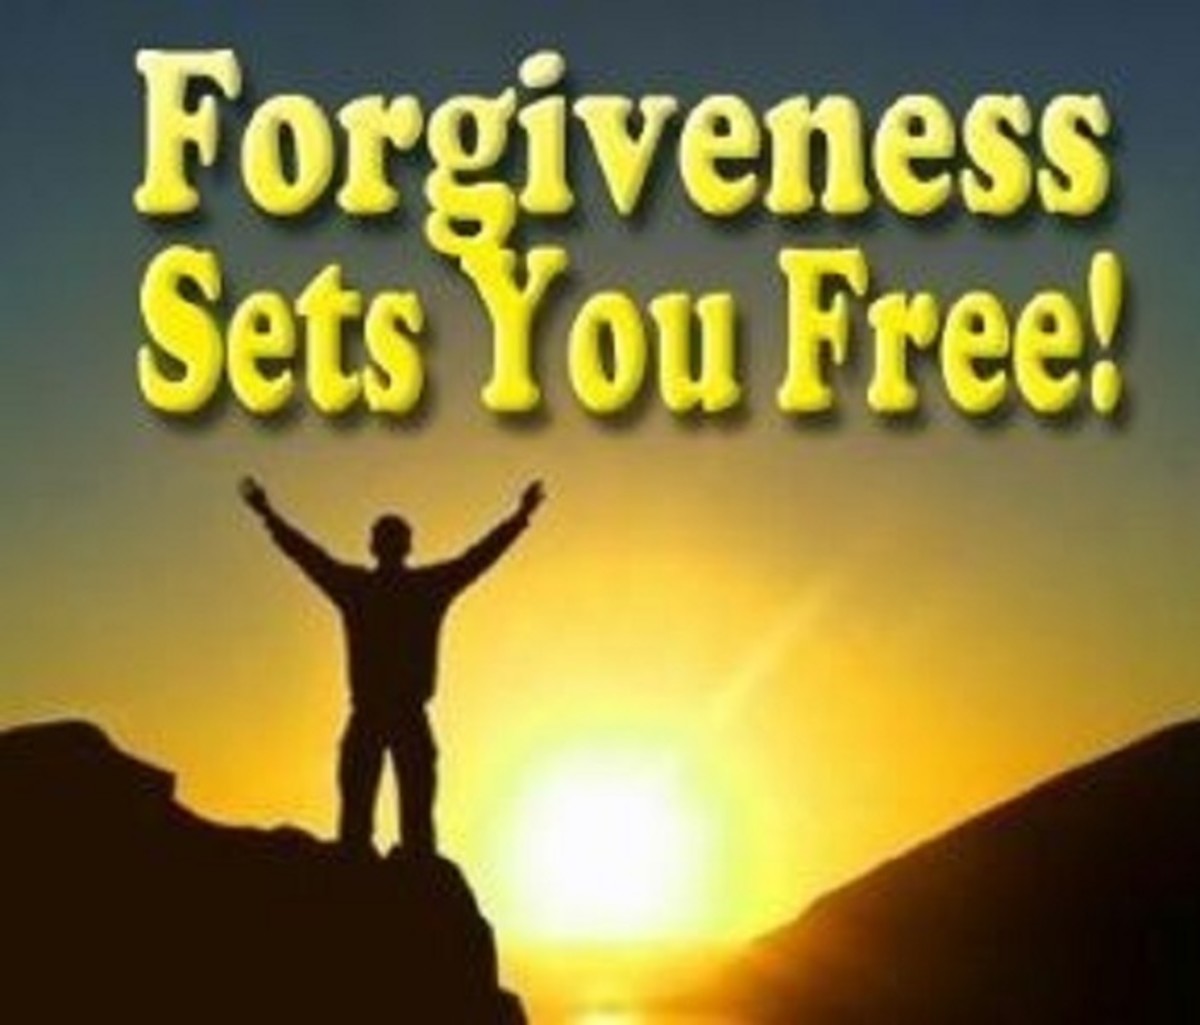 The Power of Forgiveness Will Set You Free